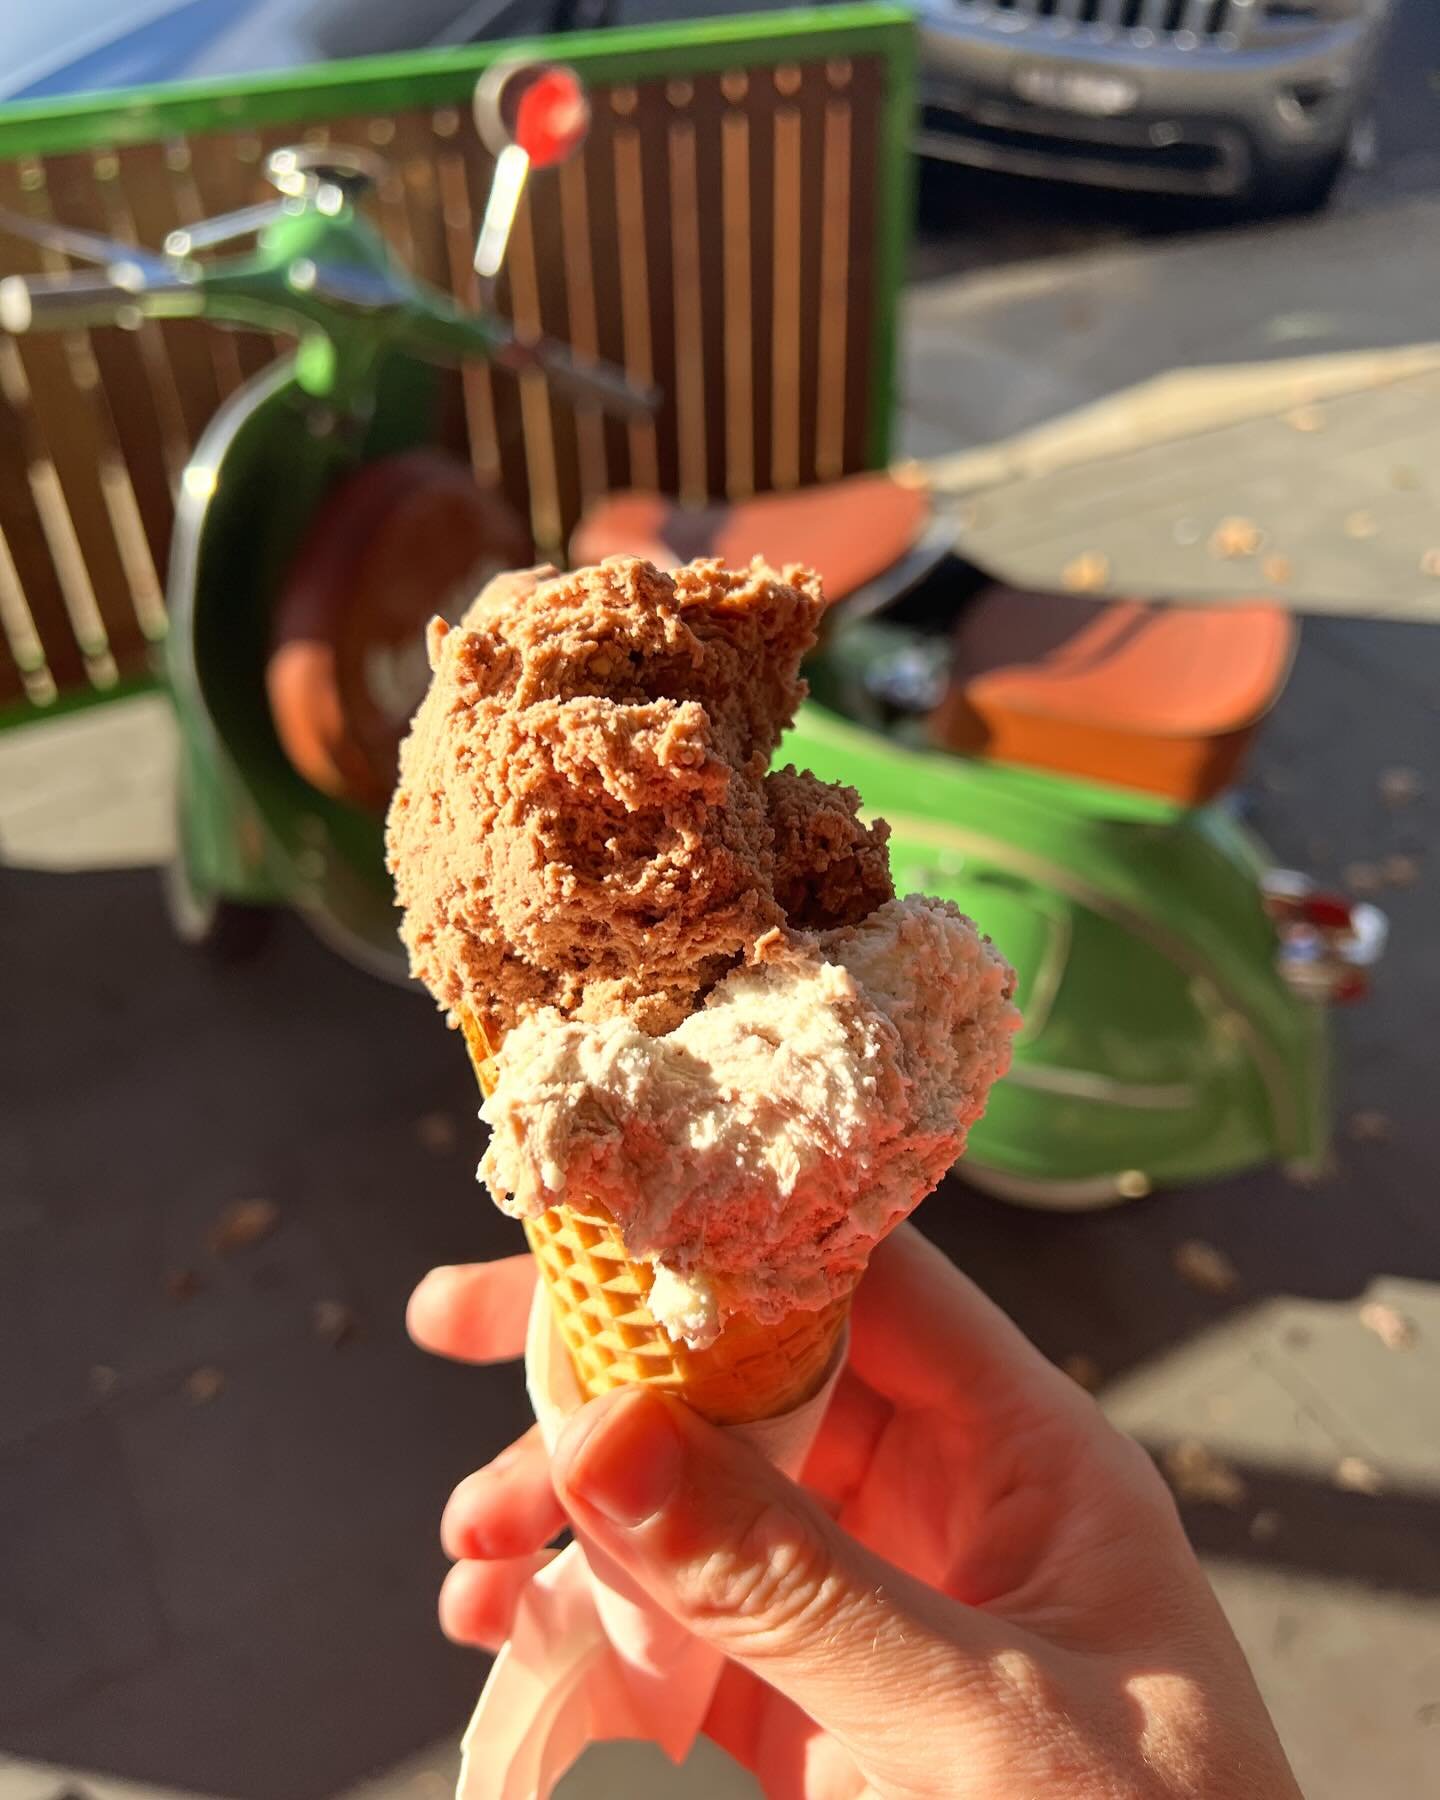 ☀️ What a beautiful day for Ballarat Heritage Festival! It may only be 11&deg; but it&rsquo;s sunny, so therefore Il Piccolo Gelato was needed 🍦

☕️🍽️ After brunch at @commongroundballarat, I popped into the Heritage Garden Party at @barklysquareba